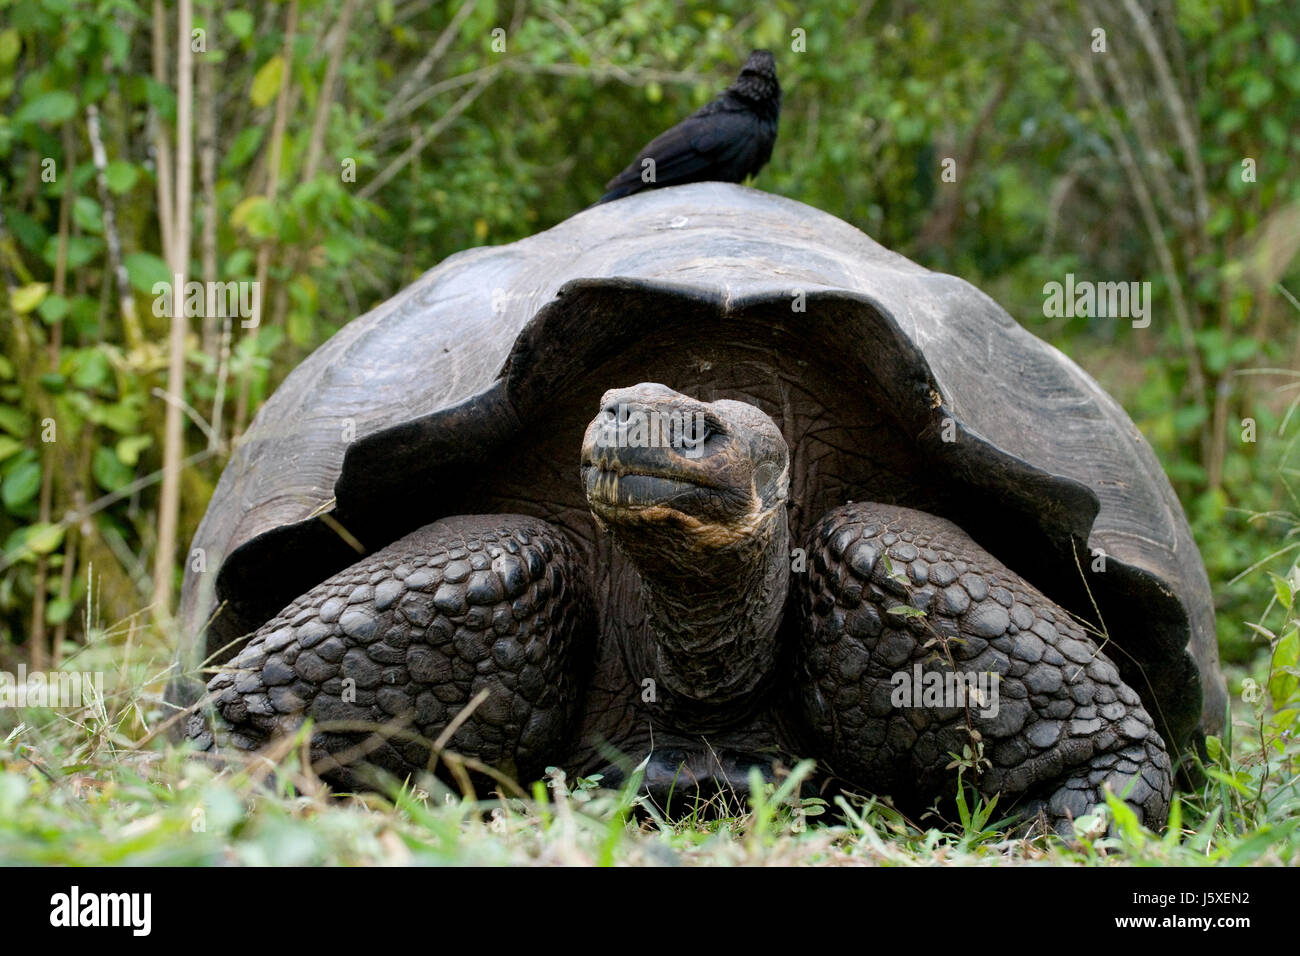 The giant turtle in the grass. The Galapagos Islands. Pacific Ocean. Ecuador. Stock Photo